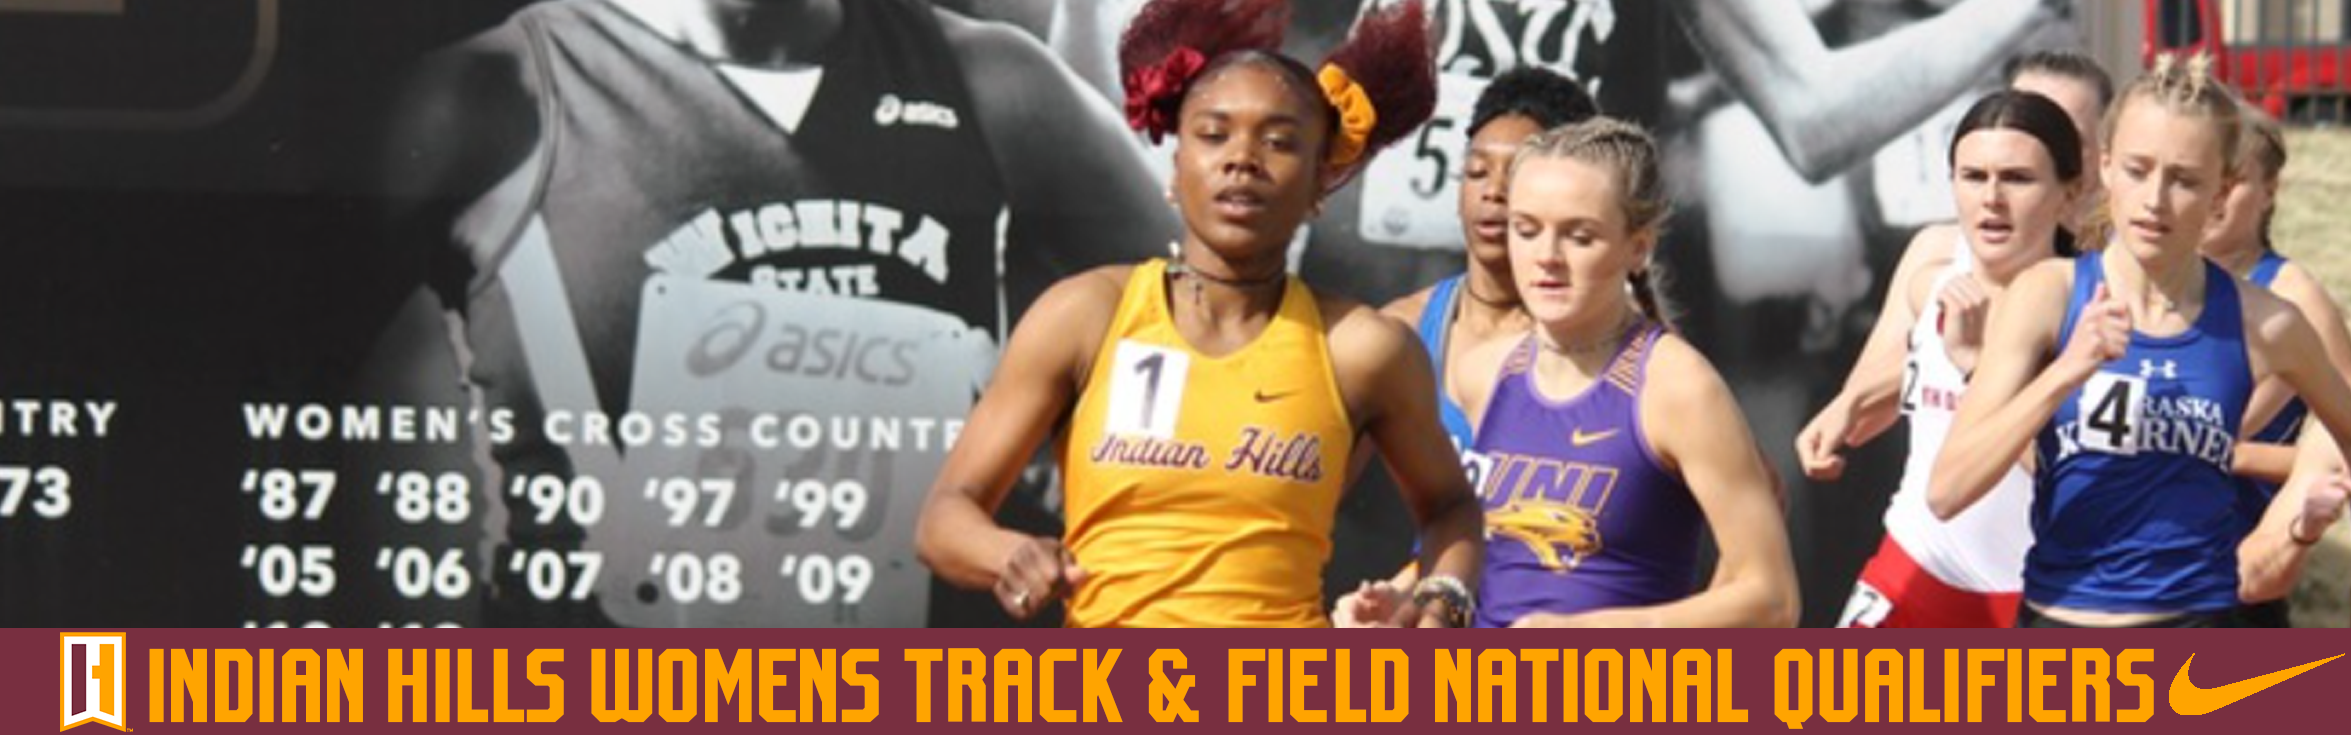 INDIAN HILLS WOMEN'S TRACK & FIELD NATIONAL QUALIFIERS